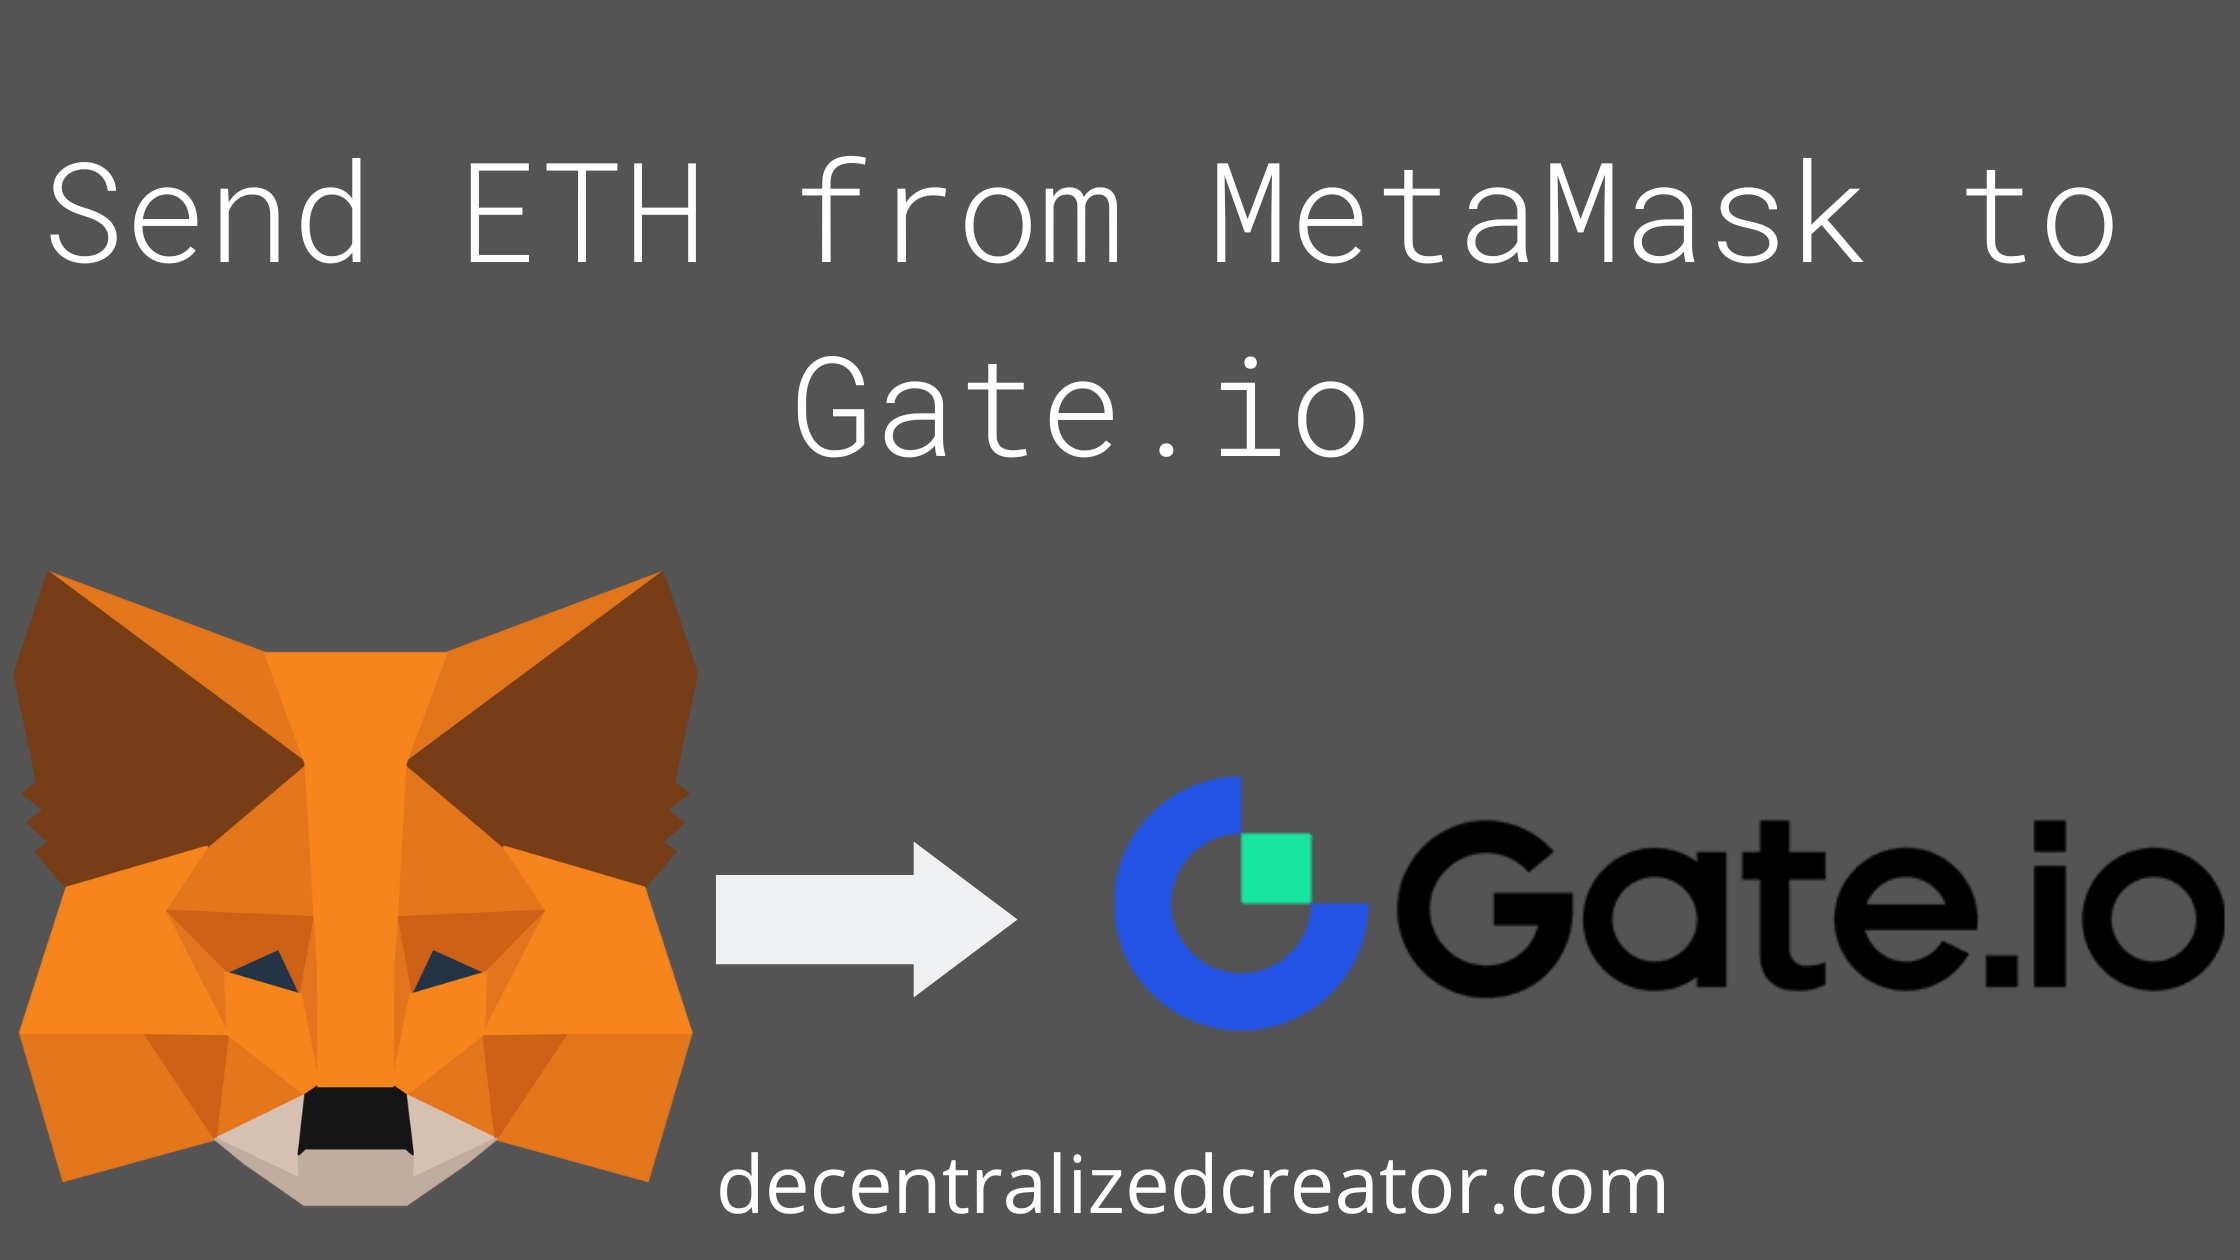 Send ETH from MetaMask to Gate.io